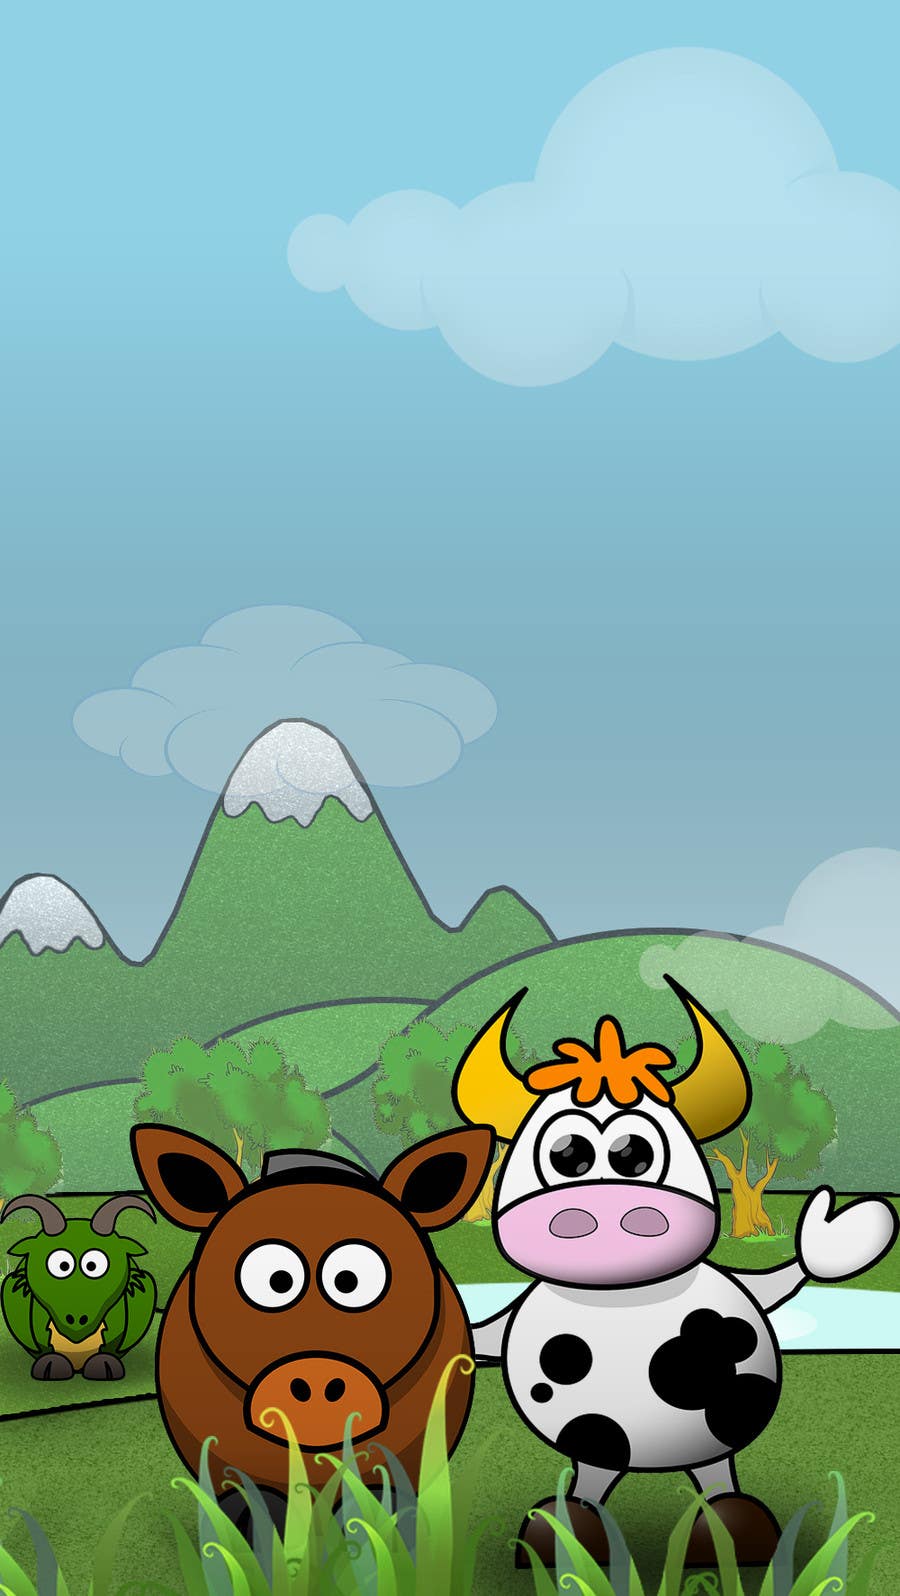 Entri Kontes #5 untuk                                                Background to 3 graphics (animals) for android game
                                            